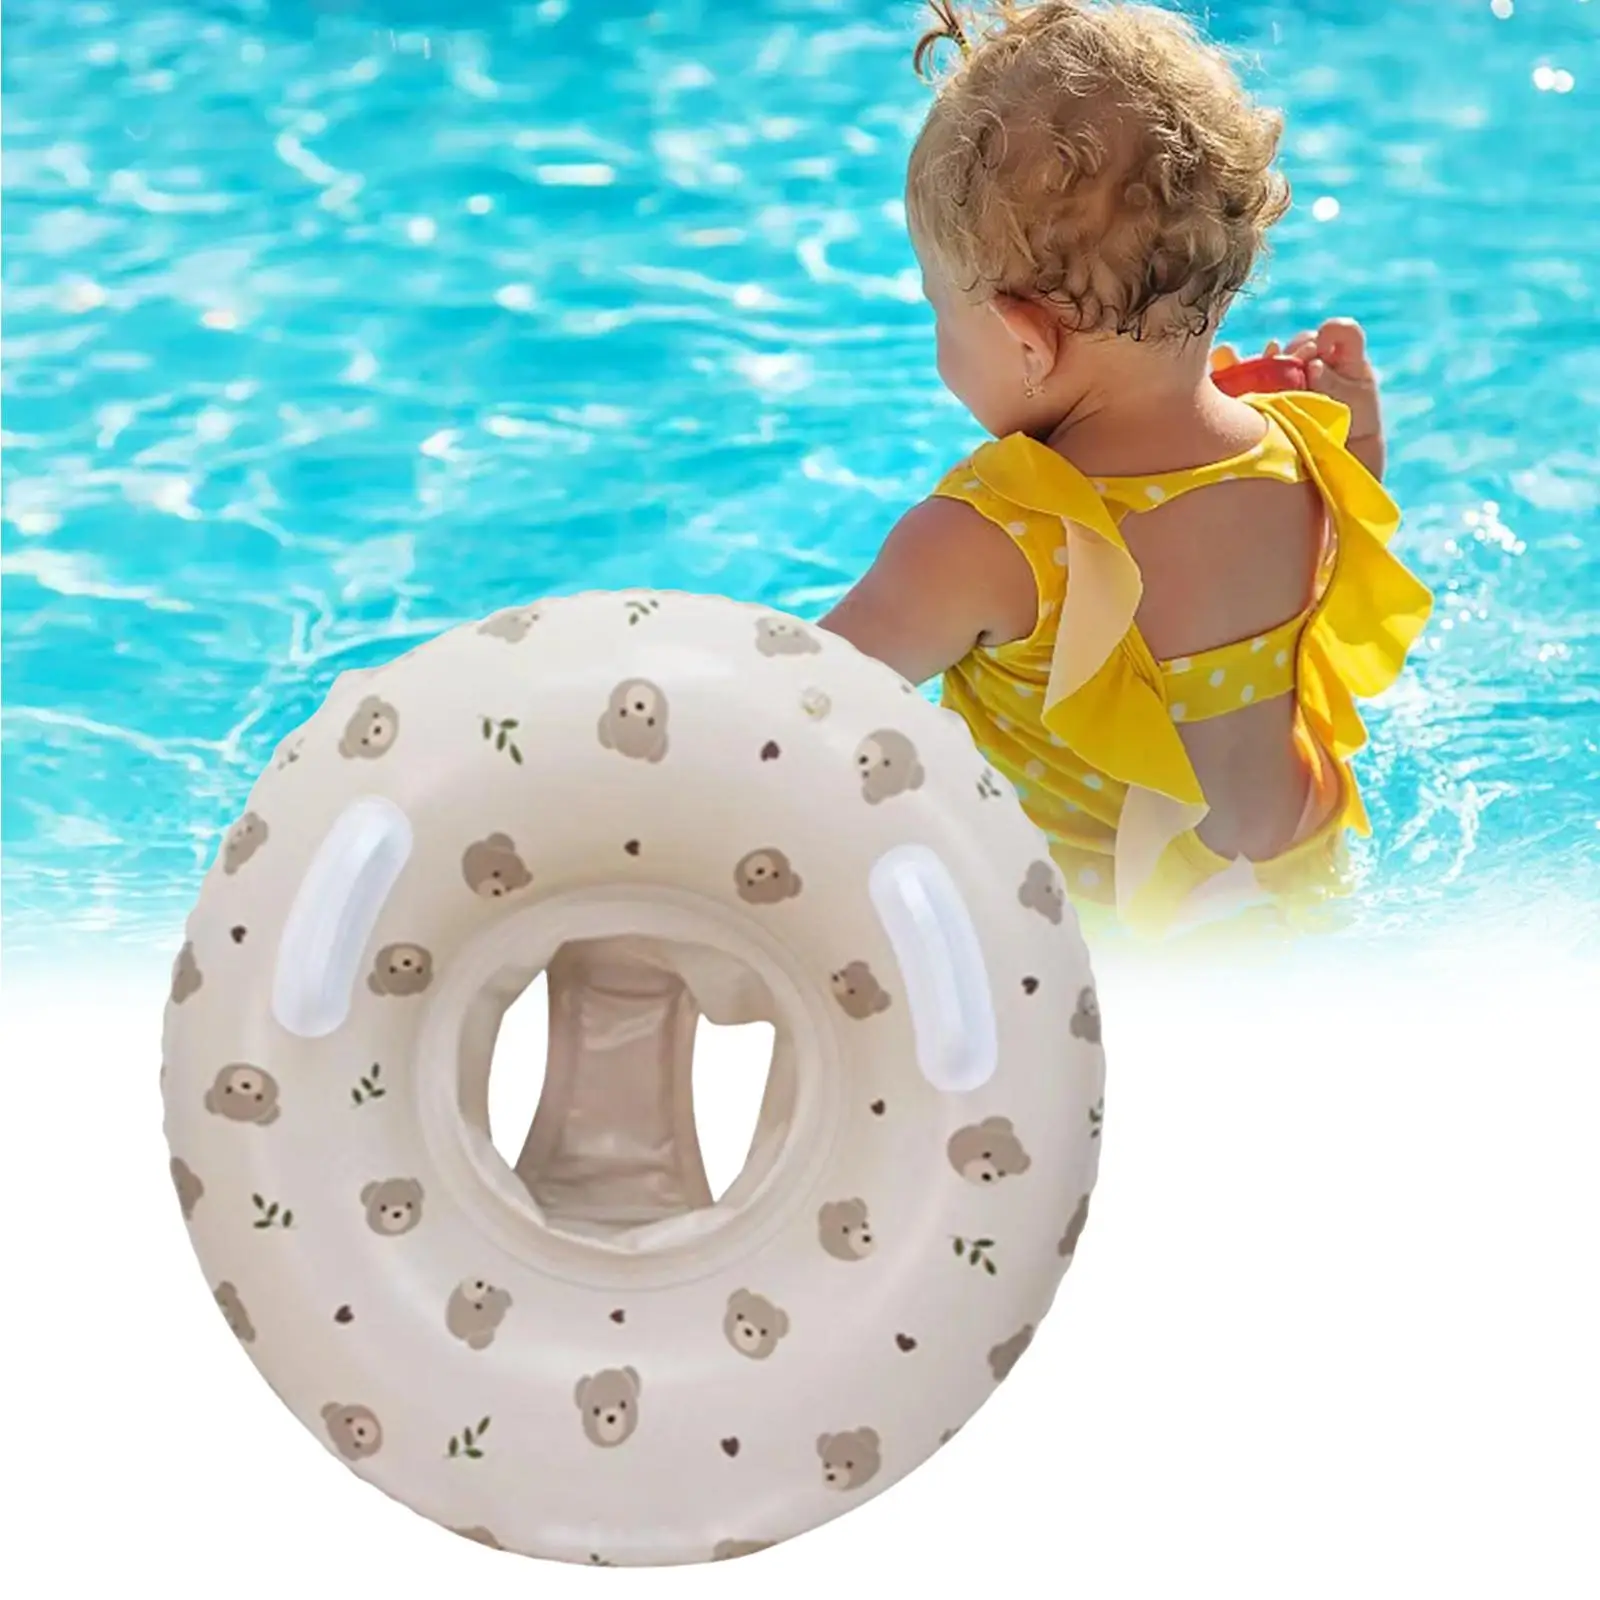 Inflatable Swimming Seat Beach Toy Fashion Inflatable 2-8 Years Old Swimming Trainer Baby for Baby Kids Infant